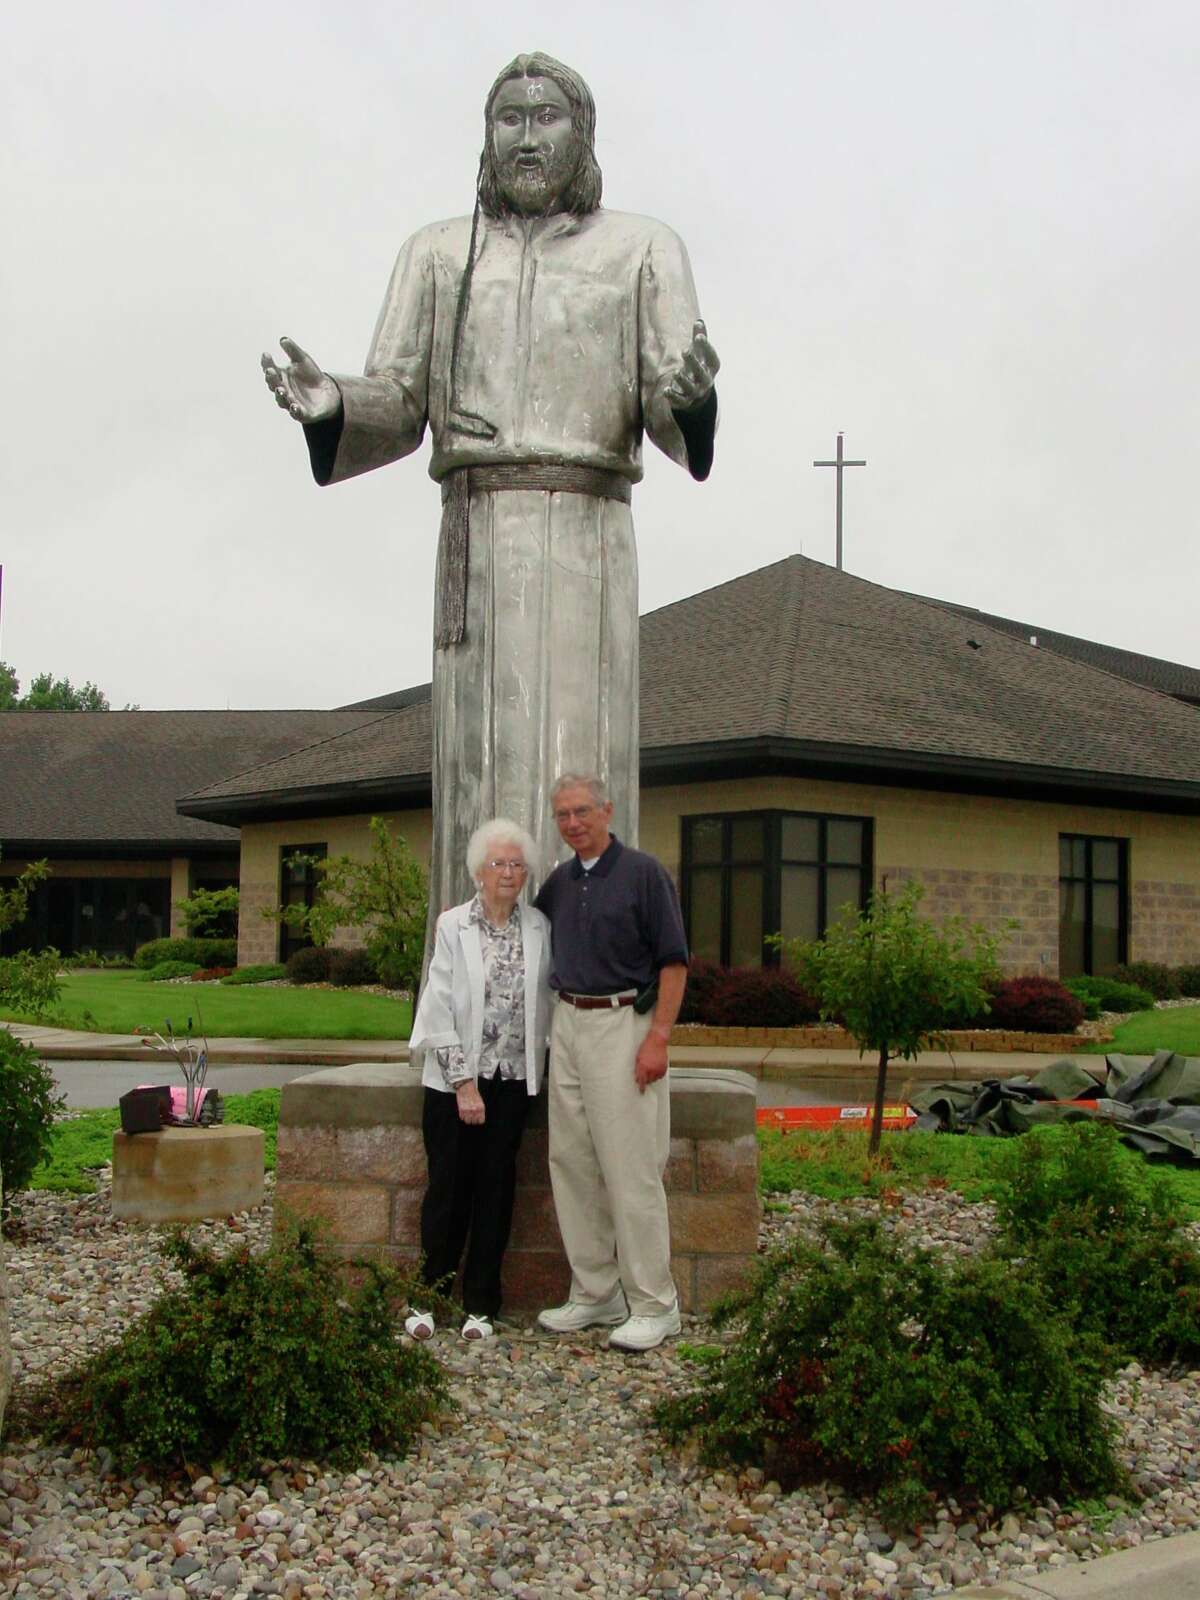 Emily Allen and her son Ernie of Midland pose with the statue of Jesus Christ in front of Messiah Lutheran Church. Ernie and his friend Jim Leigeb worked on the statue for over a year to present to the church. (Photo provided/Facebook)